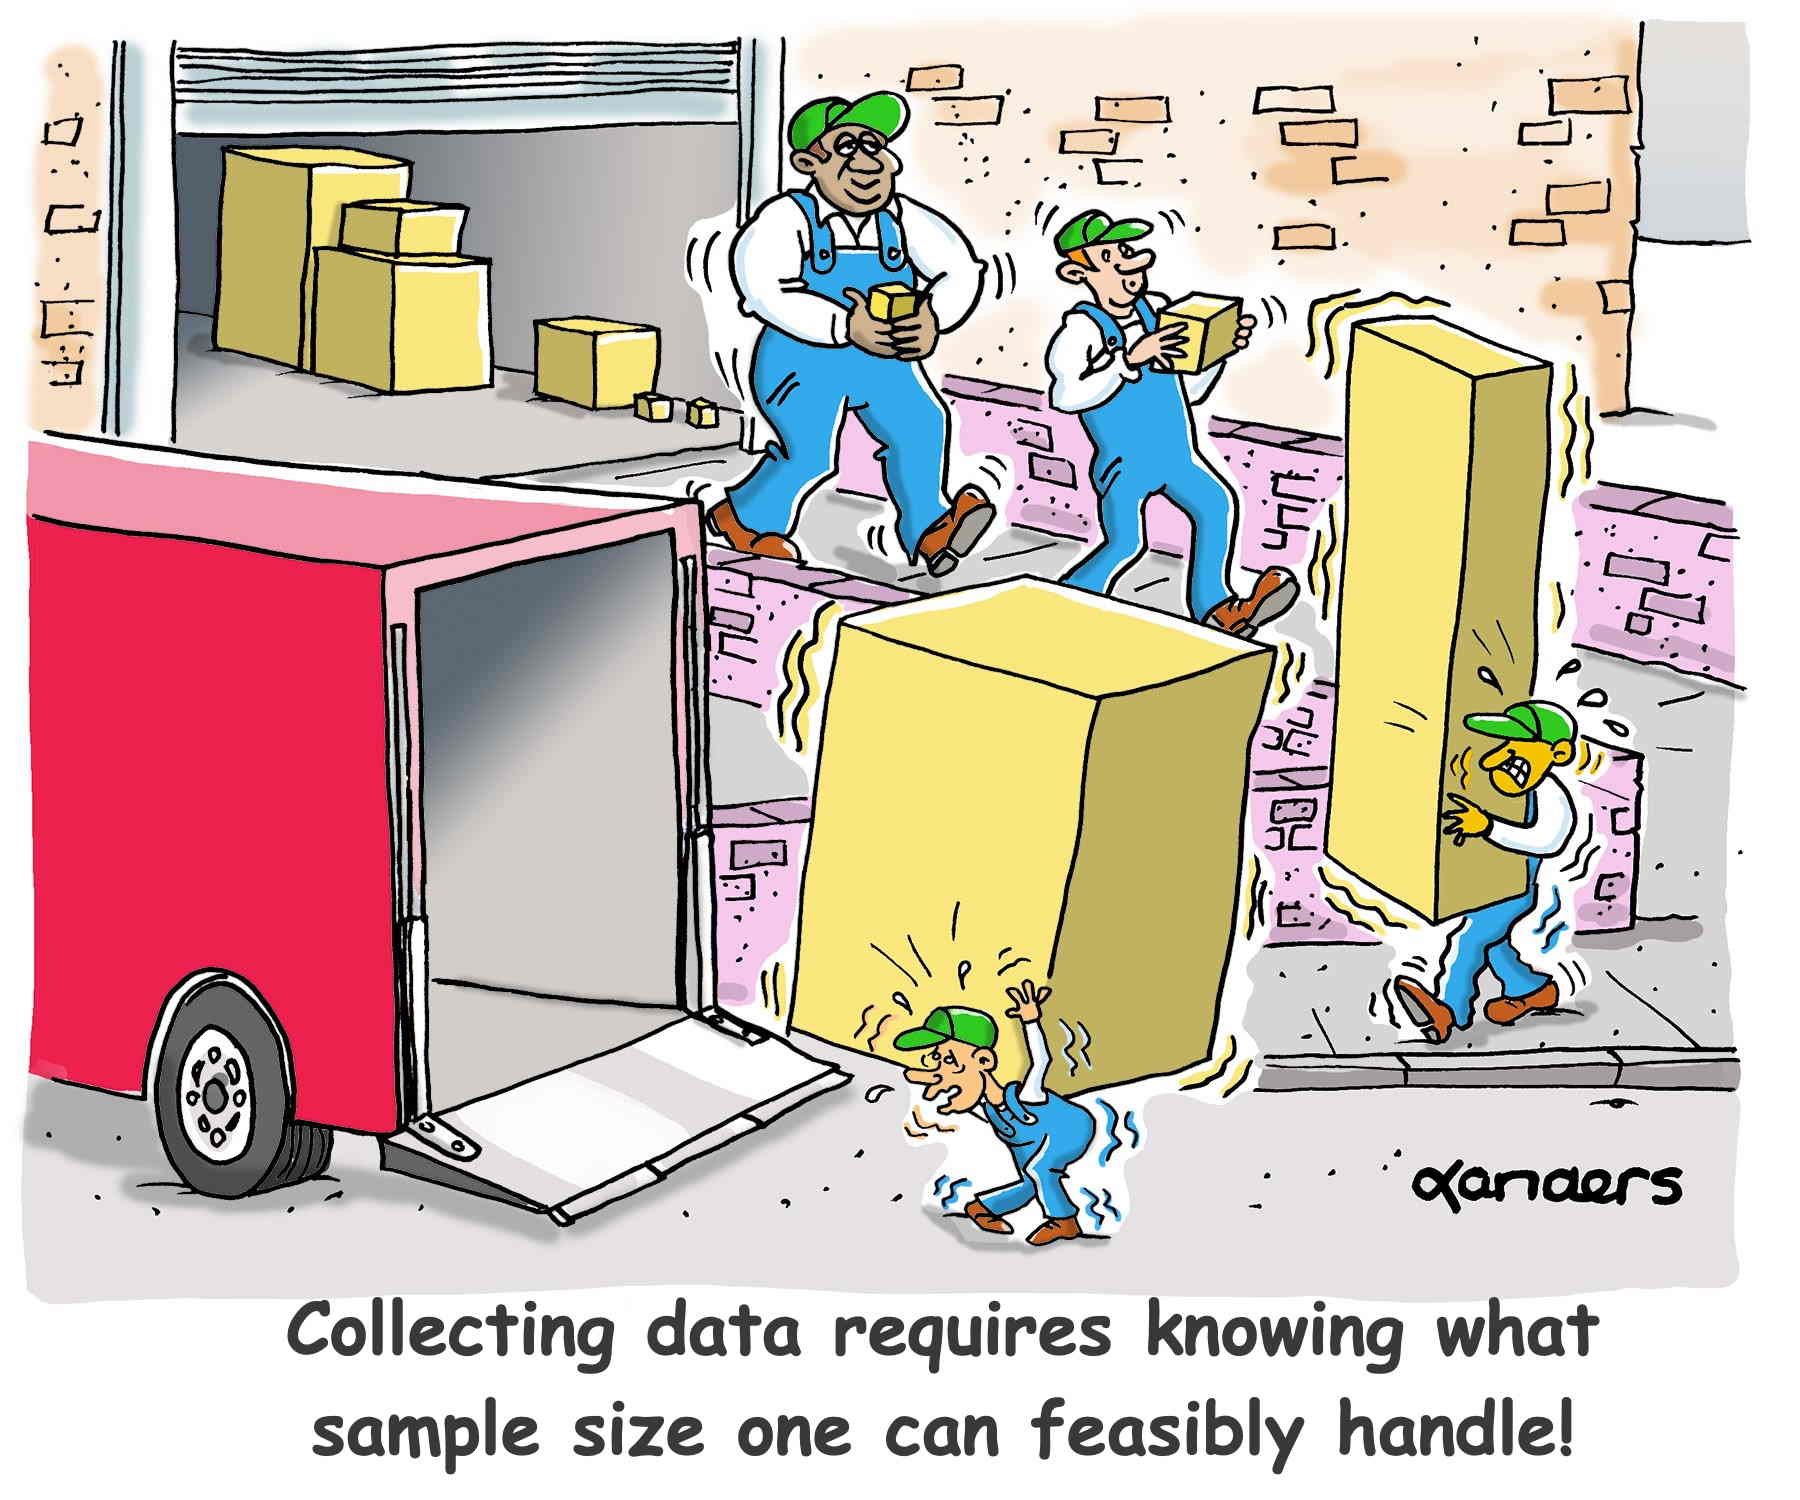 cartoon showing moving company with biggest and strongest person carrying the smallest package and smallest person carrying the largest package.  Caption says: Collecting data requires knowing what sample size one can feasibly handle